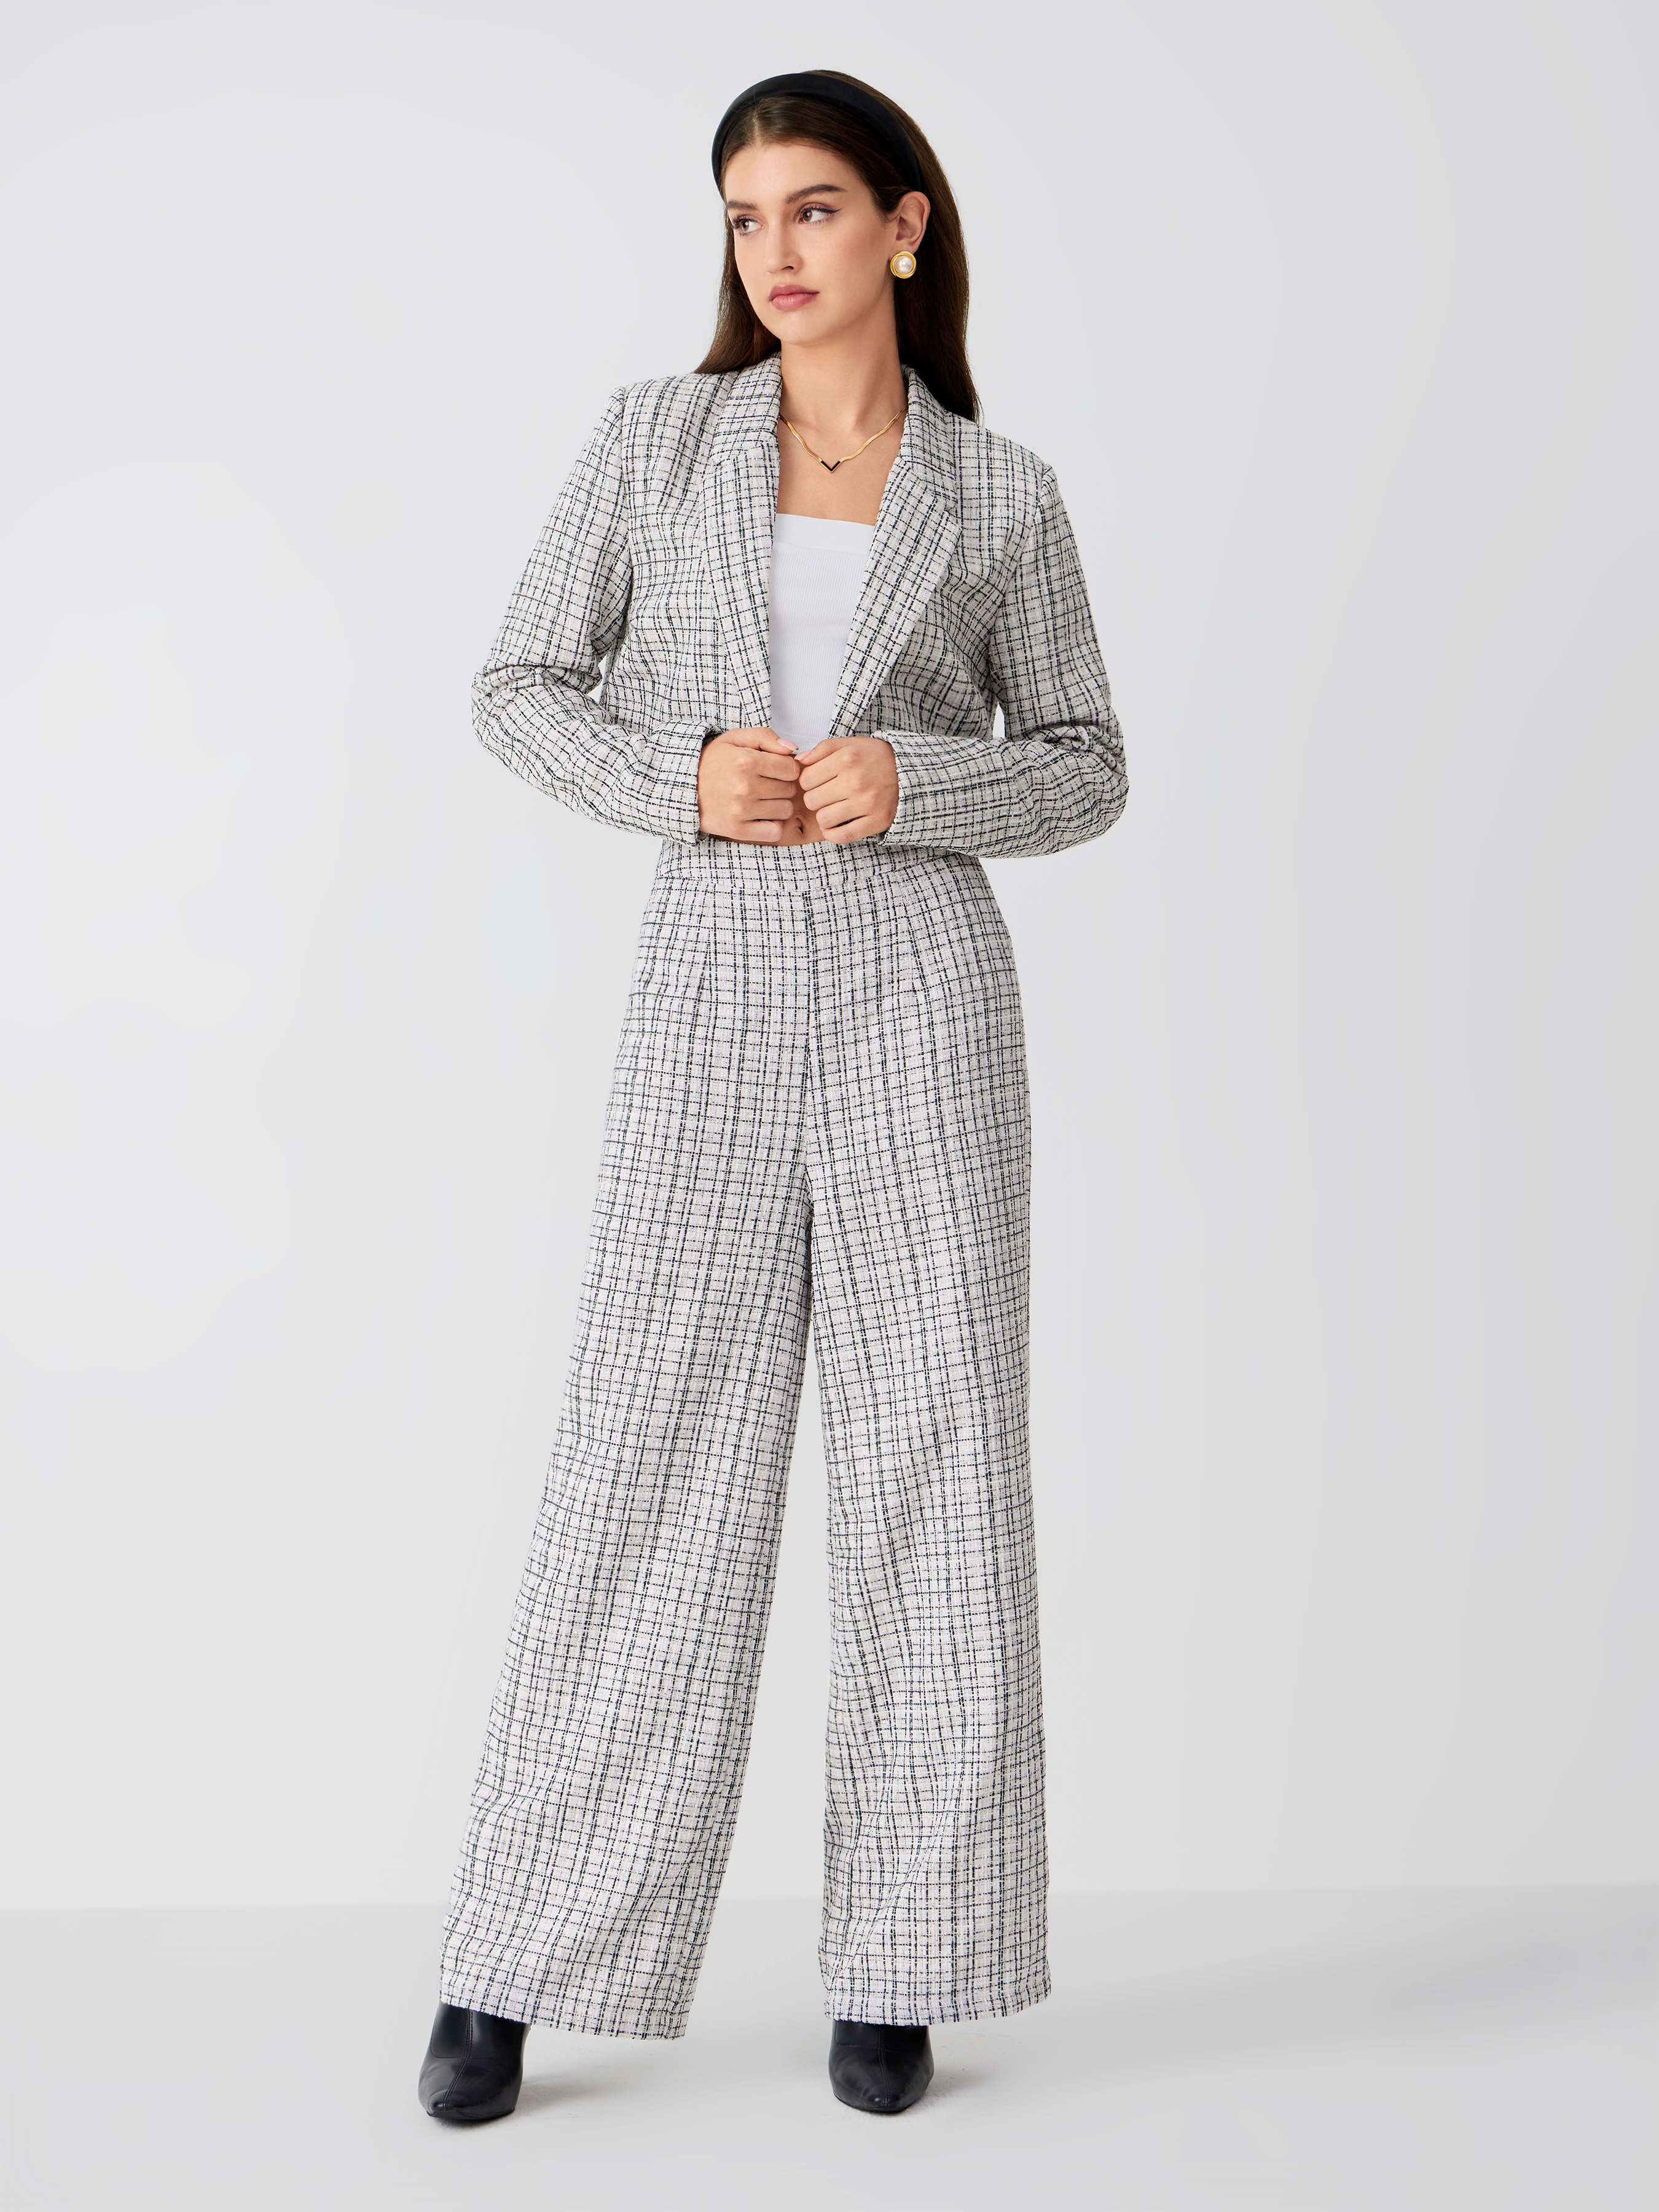 Women's Trousers | New Collection Online | ZARA United Kingdom | Trousers  women, High waisted pants, Pants for women